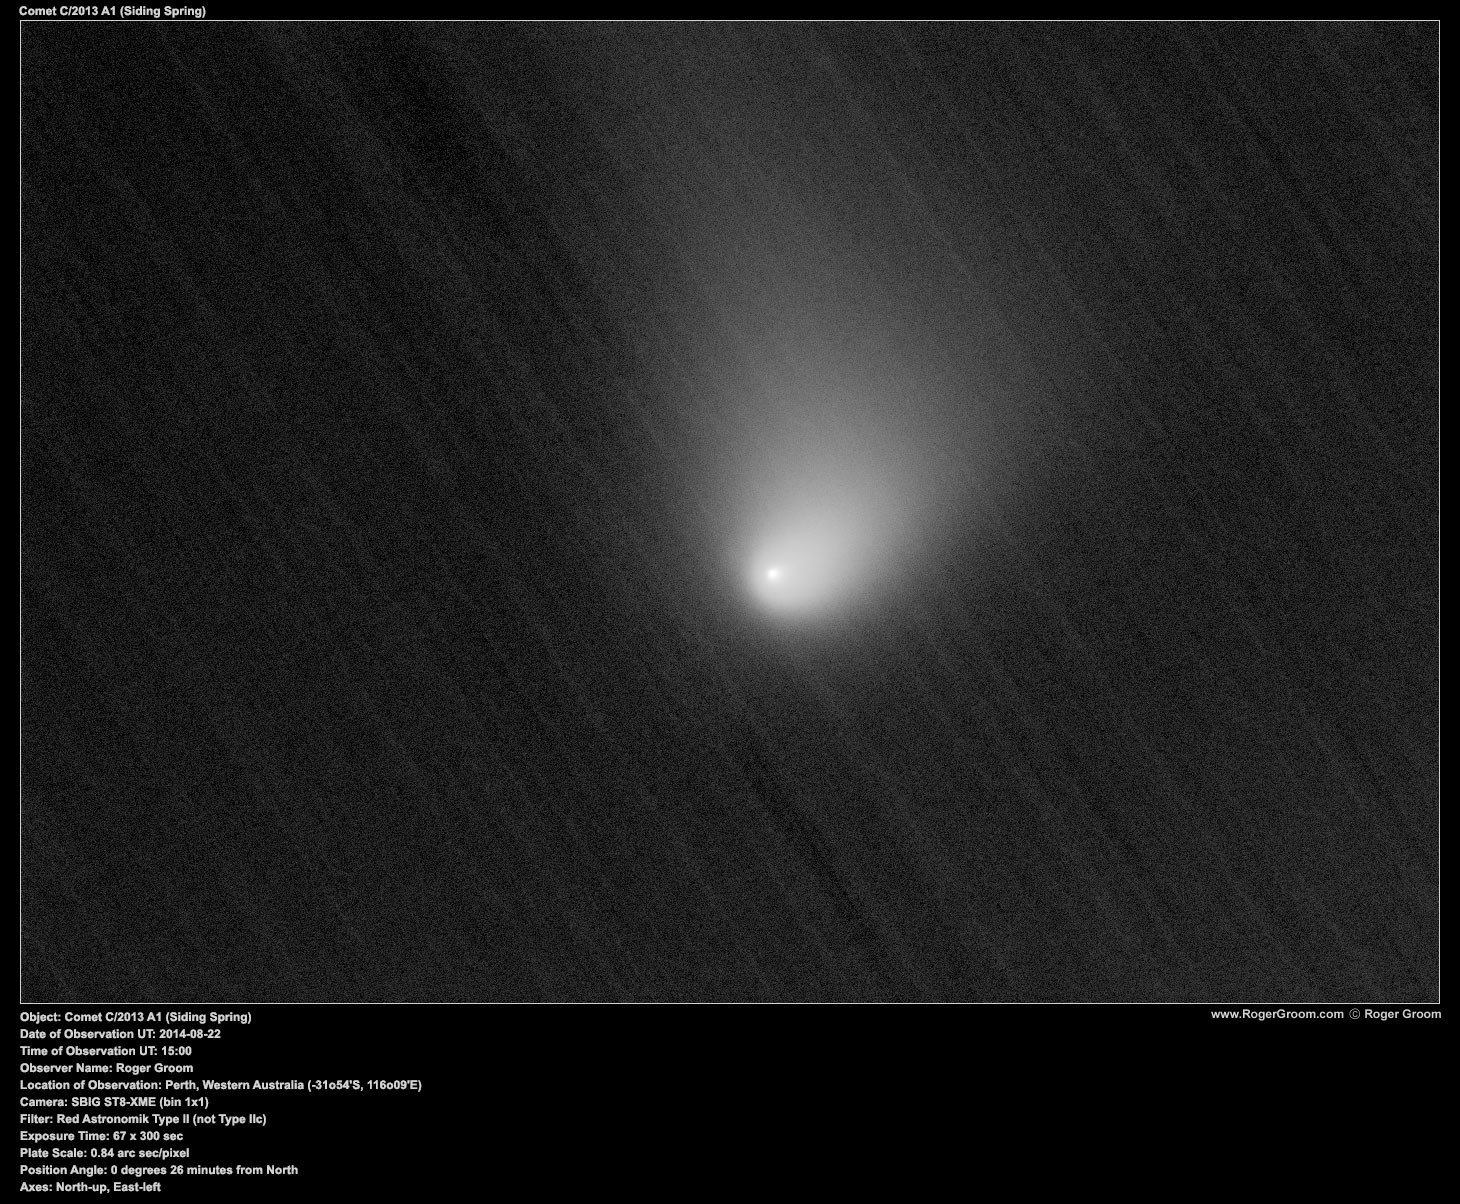 Object: Comet C/2013 A1 (Siding Spring) Date of Observation UT: 2014-08-22 Time of Observation UT: 15:00 Observer Name: Roger Groom Location of Observation: Perth, Western Australia (-31o54'S, 116o09'E) Camera: SBIG ST8-XME (bin 1x1) Filter: Red Astronomik Type II (not Type IIc) Exposure Time: 67 x 300 sec (mean combine) Plate Scale: 0.84 arc sec/pixel Position Angle: 0 degrees 26 minutes from North Axes: North-up, East-left Processing notes: Mean combined 67 exposures with sigma reject to assist with removal of stars.